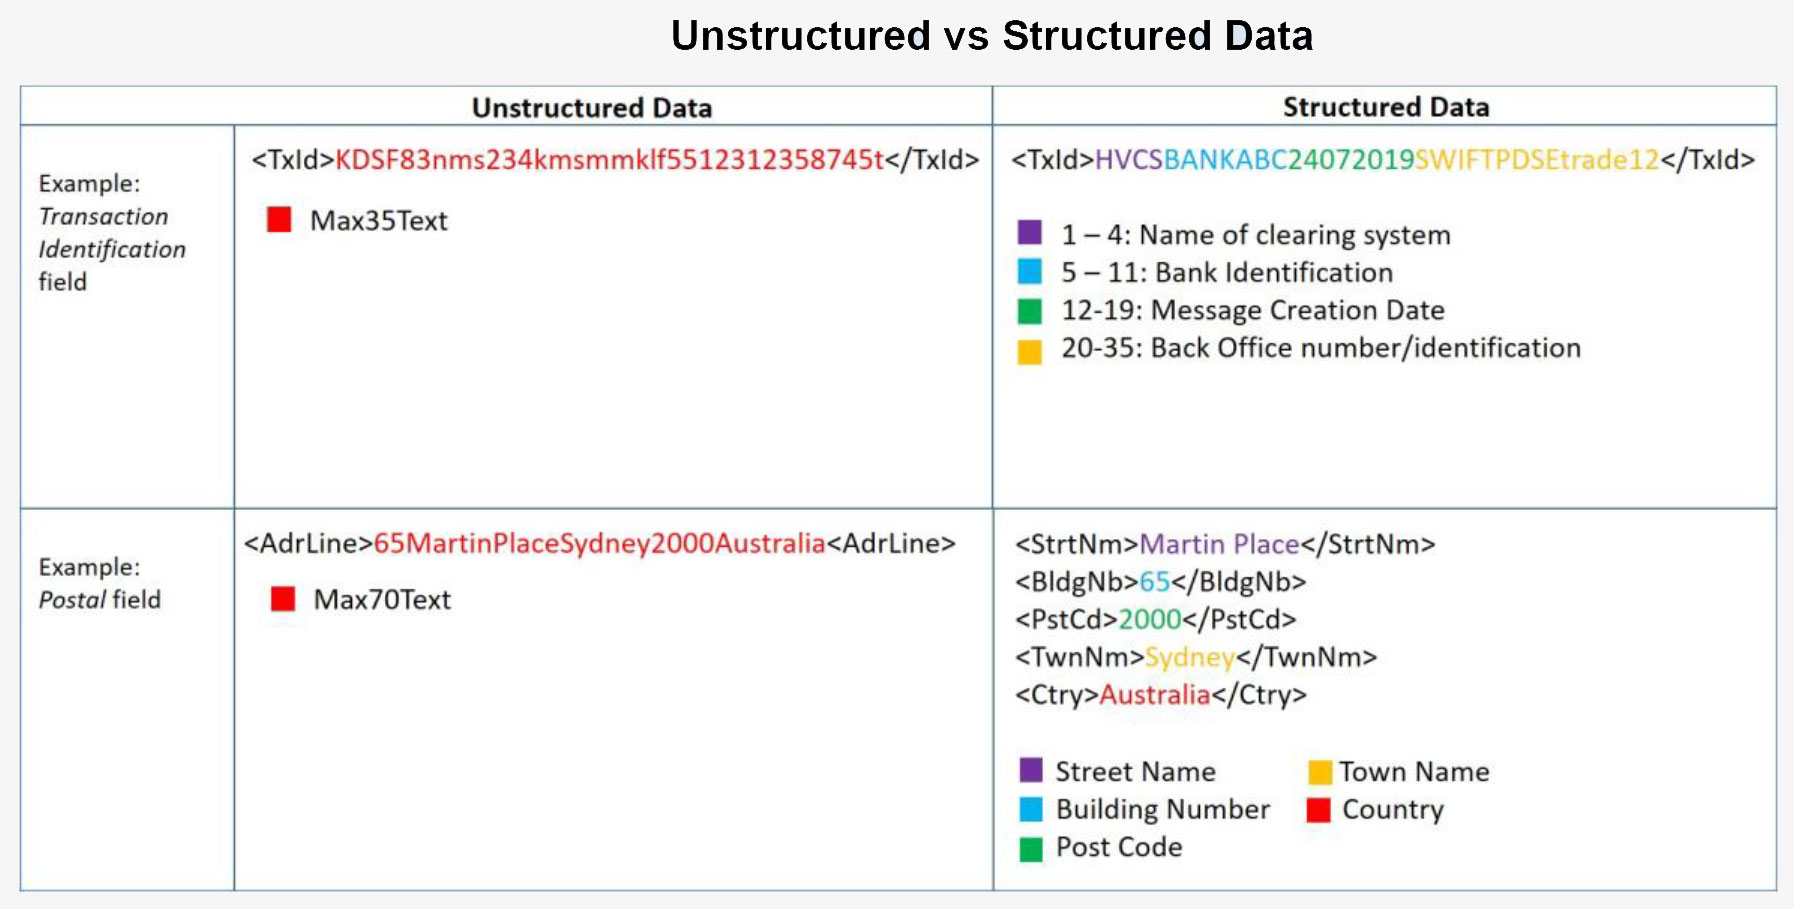 Figure 5: Unstructured vs Structured Data